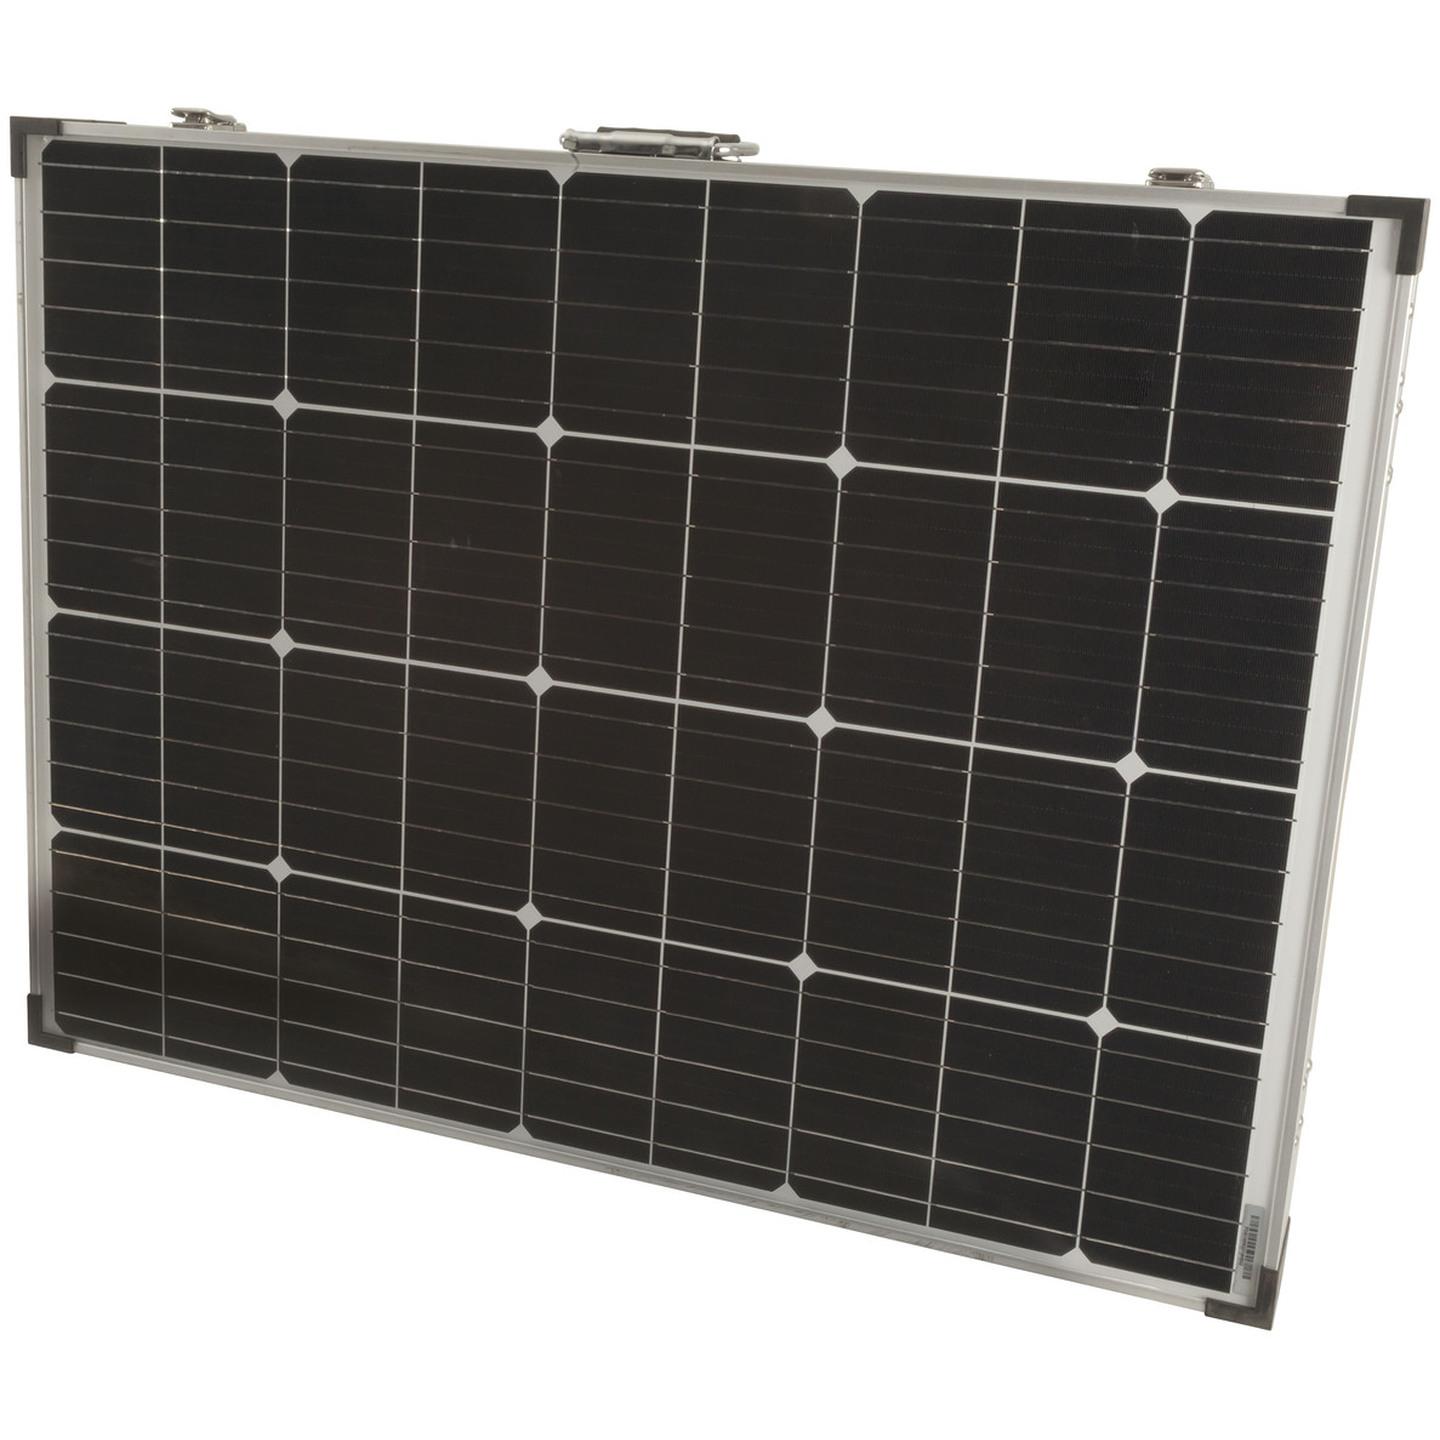 12V 200W Folding Solar Panel with 5M Cable